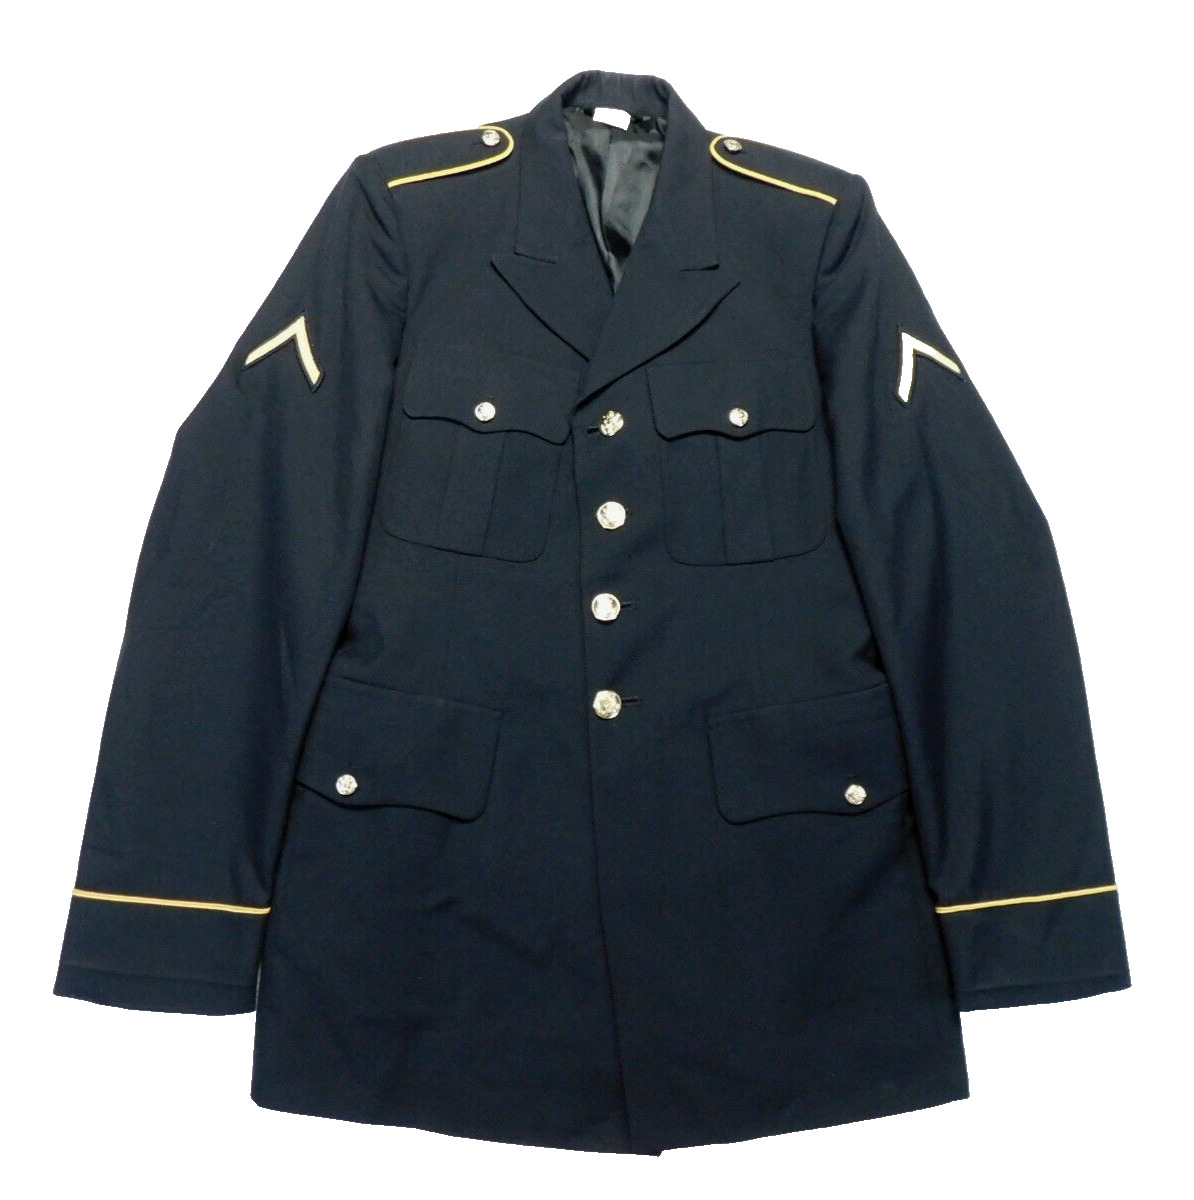 US Army ASU Coat 40 Long Classic Dress Blue 450 PolyWool Service Jacket Enlisted